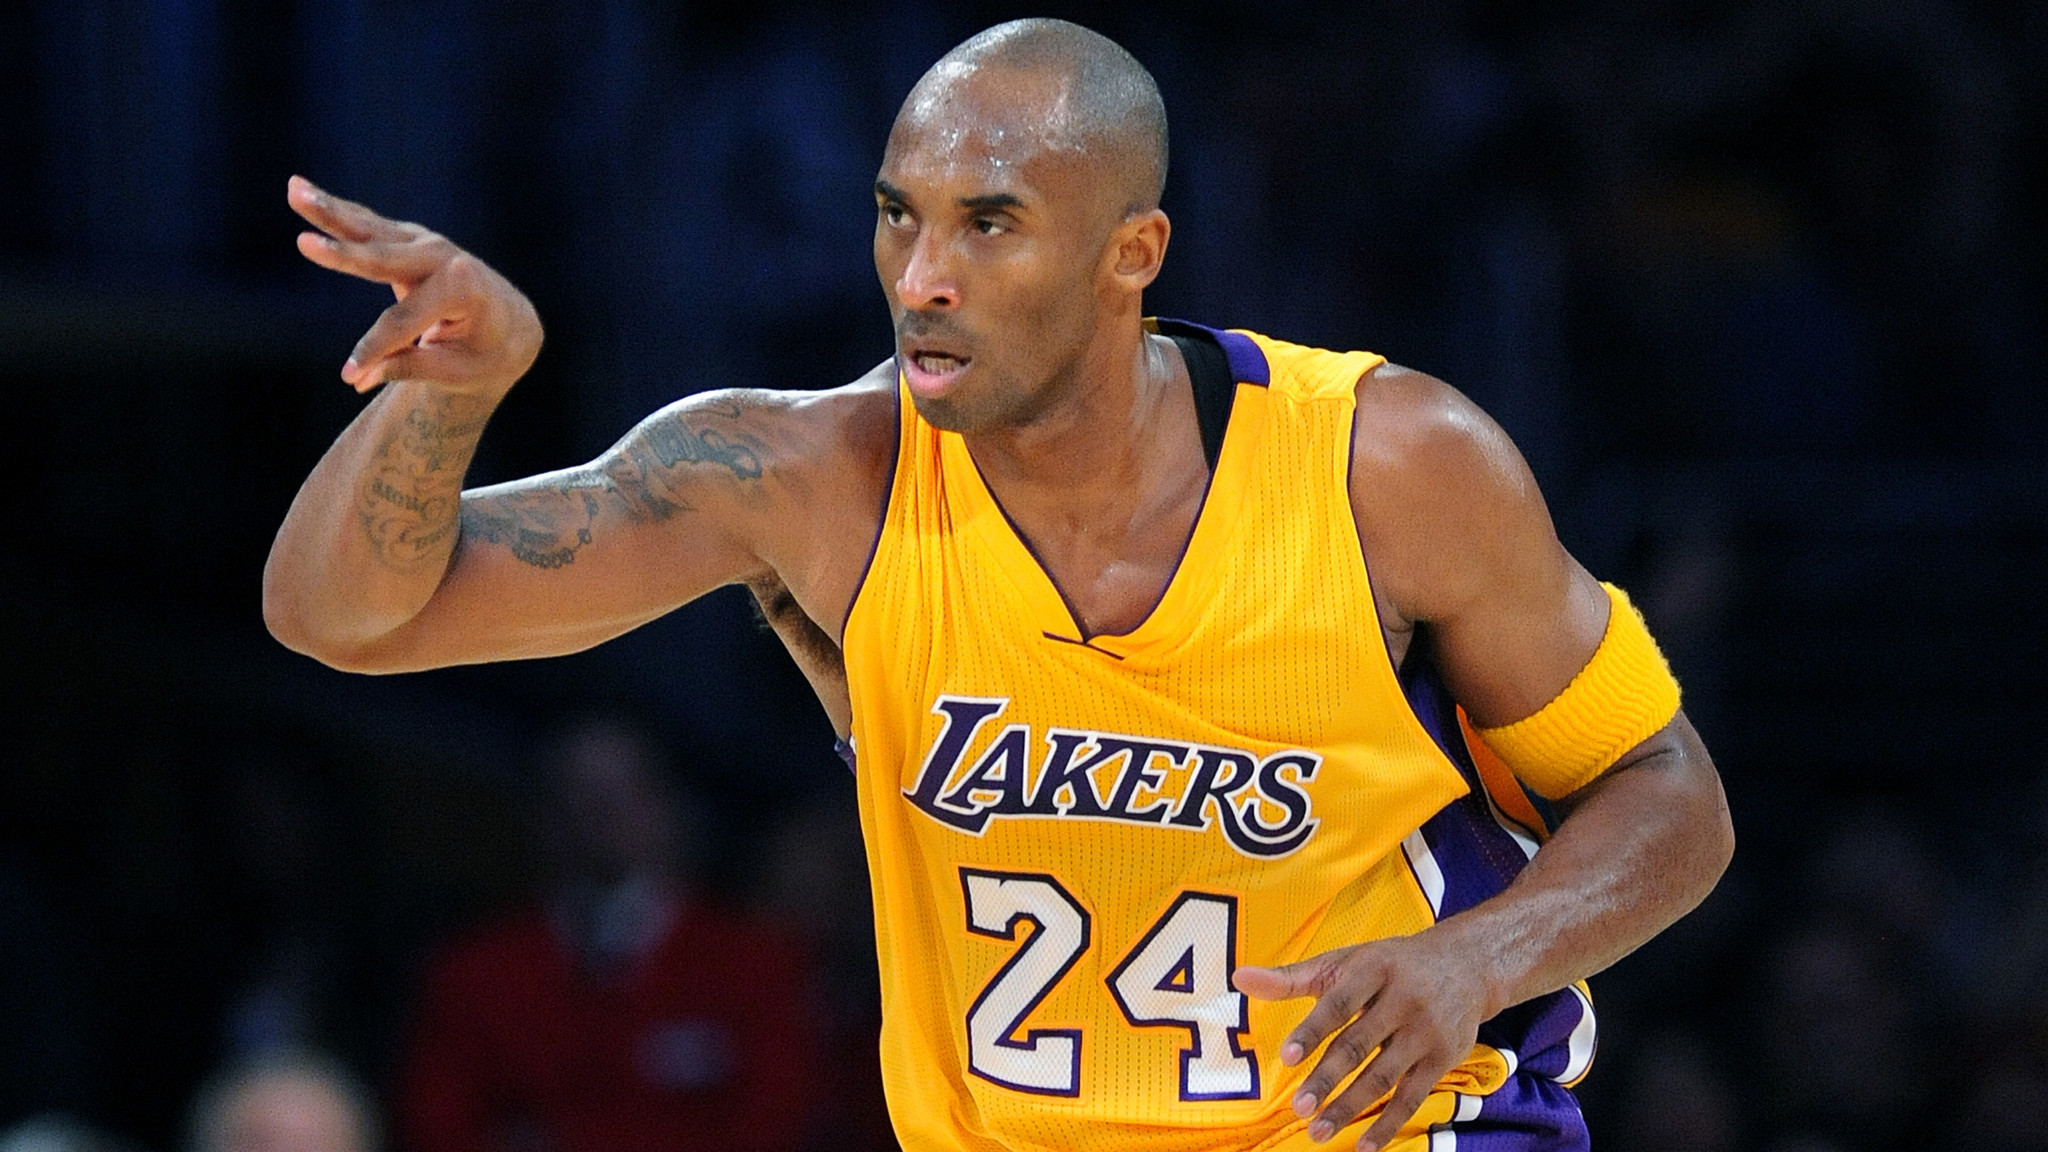 Kobe Bryant to retire after this season: ‘My body knows it’s time to say goodbye’